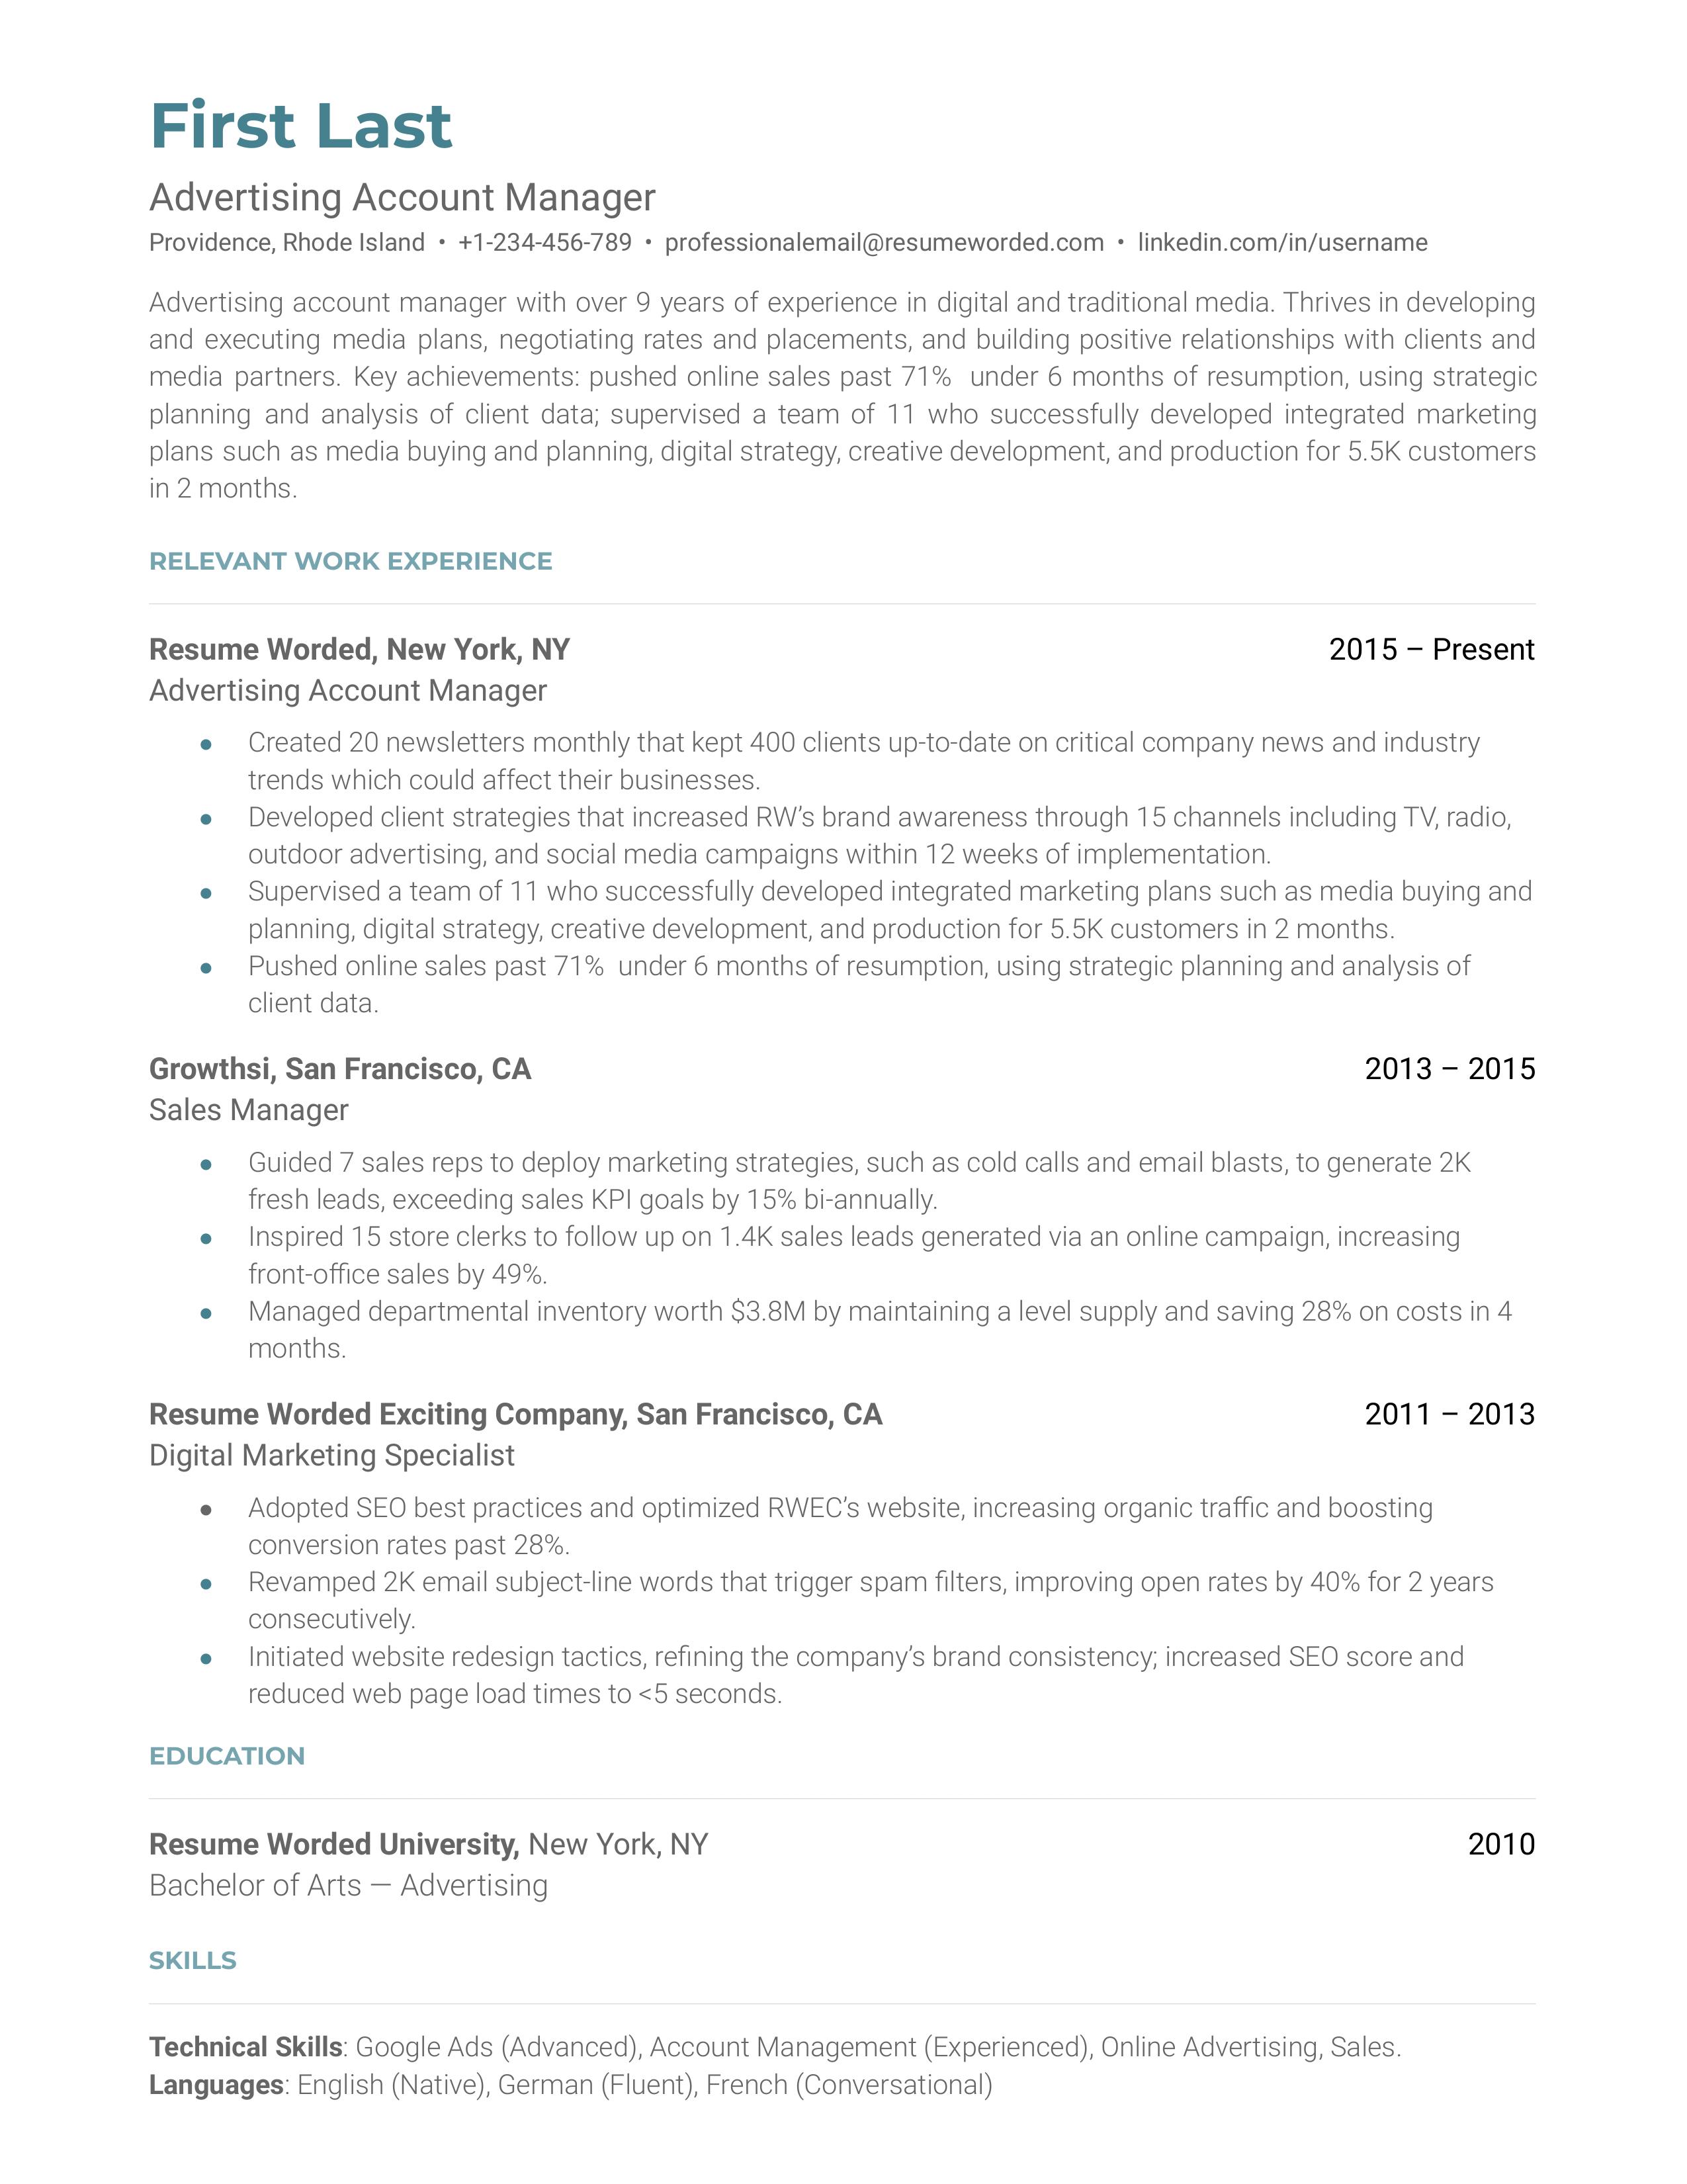 Advertising Account Manager Resume Sample